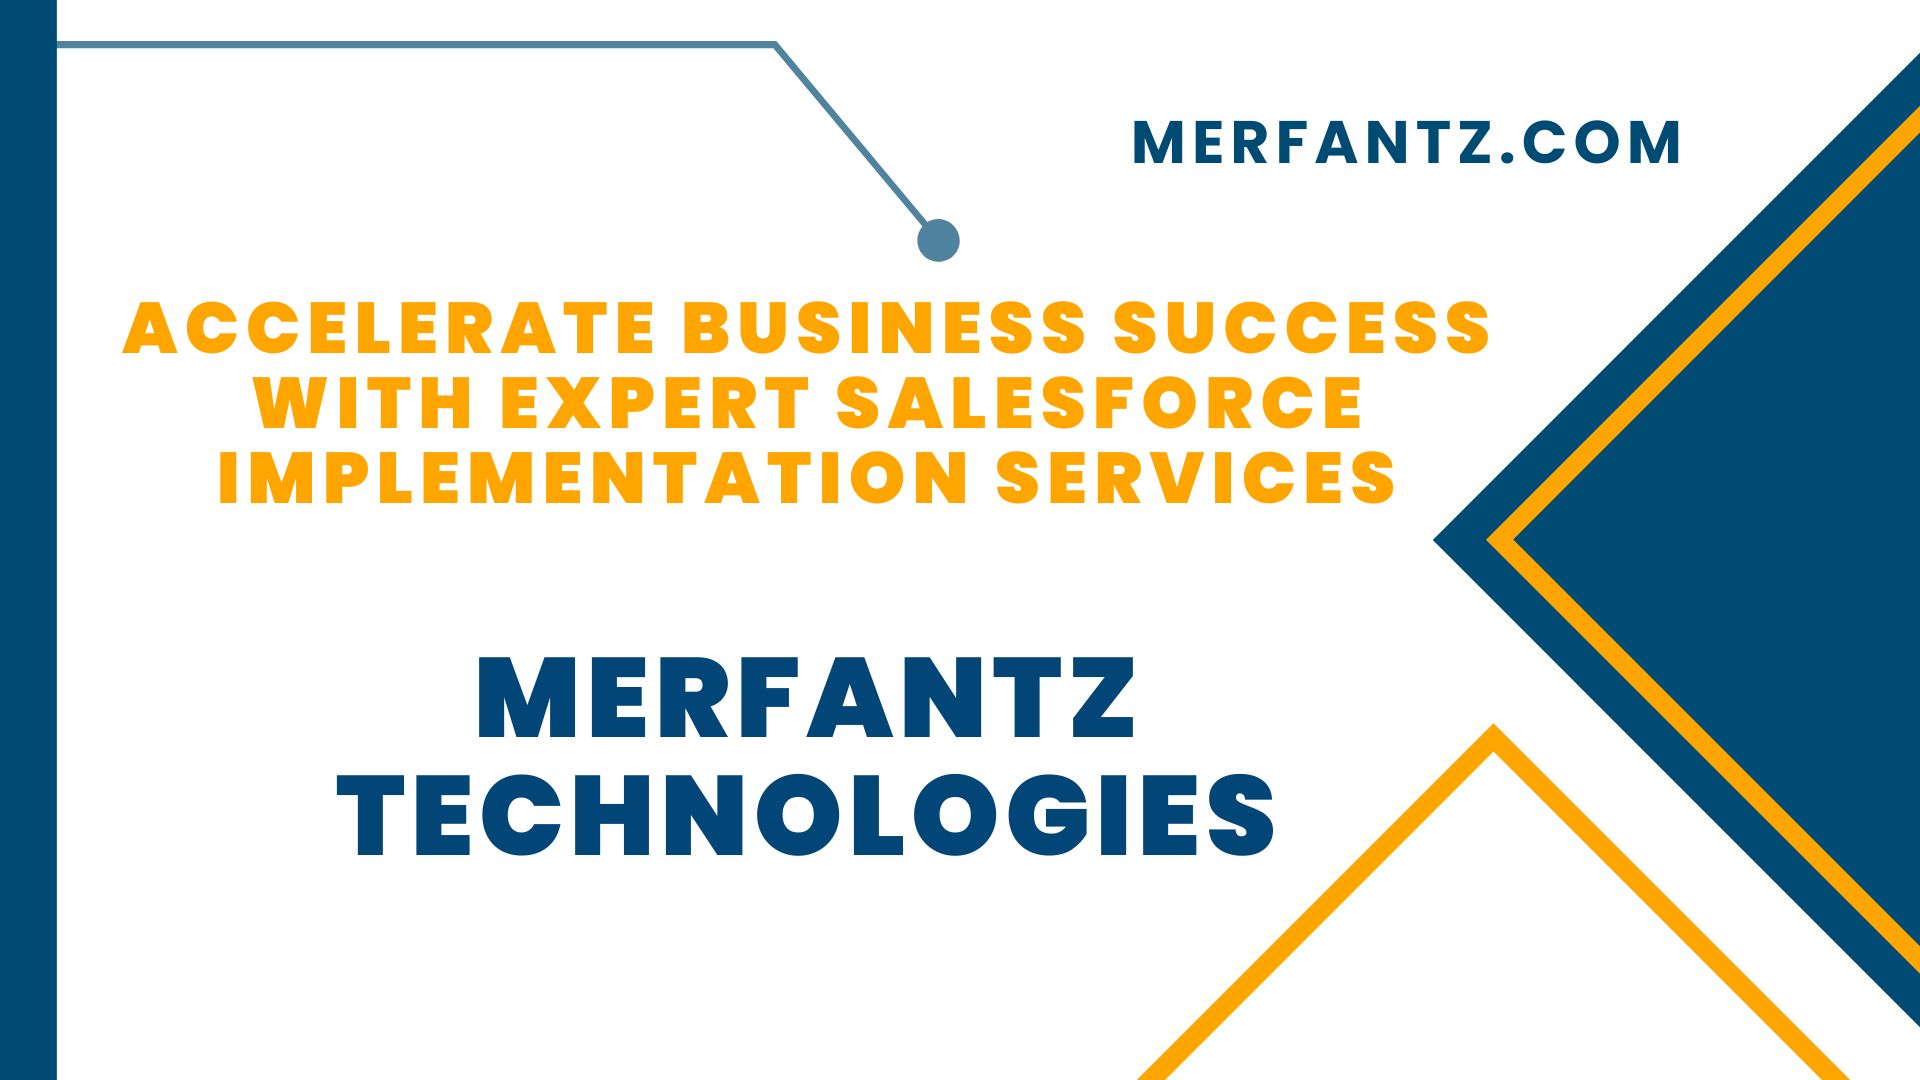 Accelerate Business Success with Expert Salesforce Implementation Services